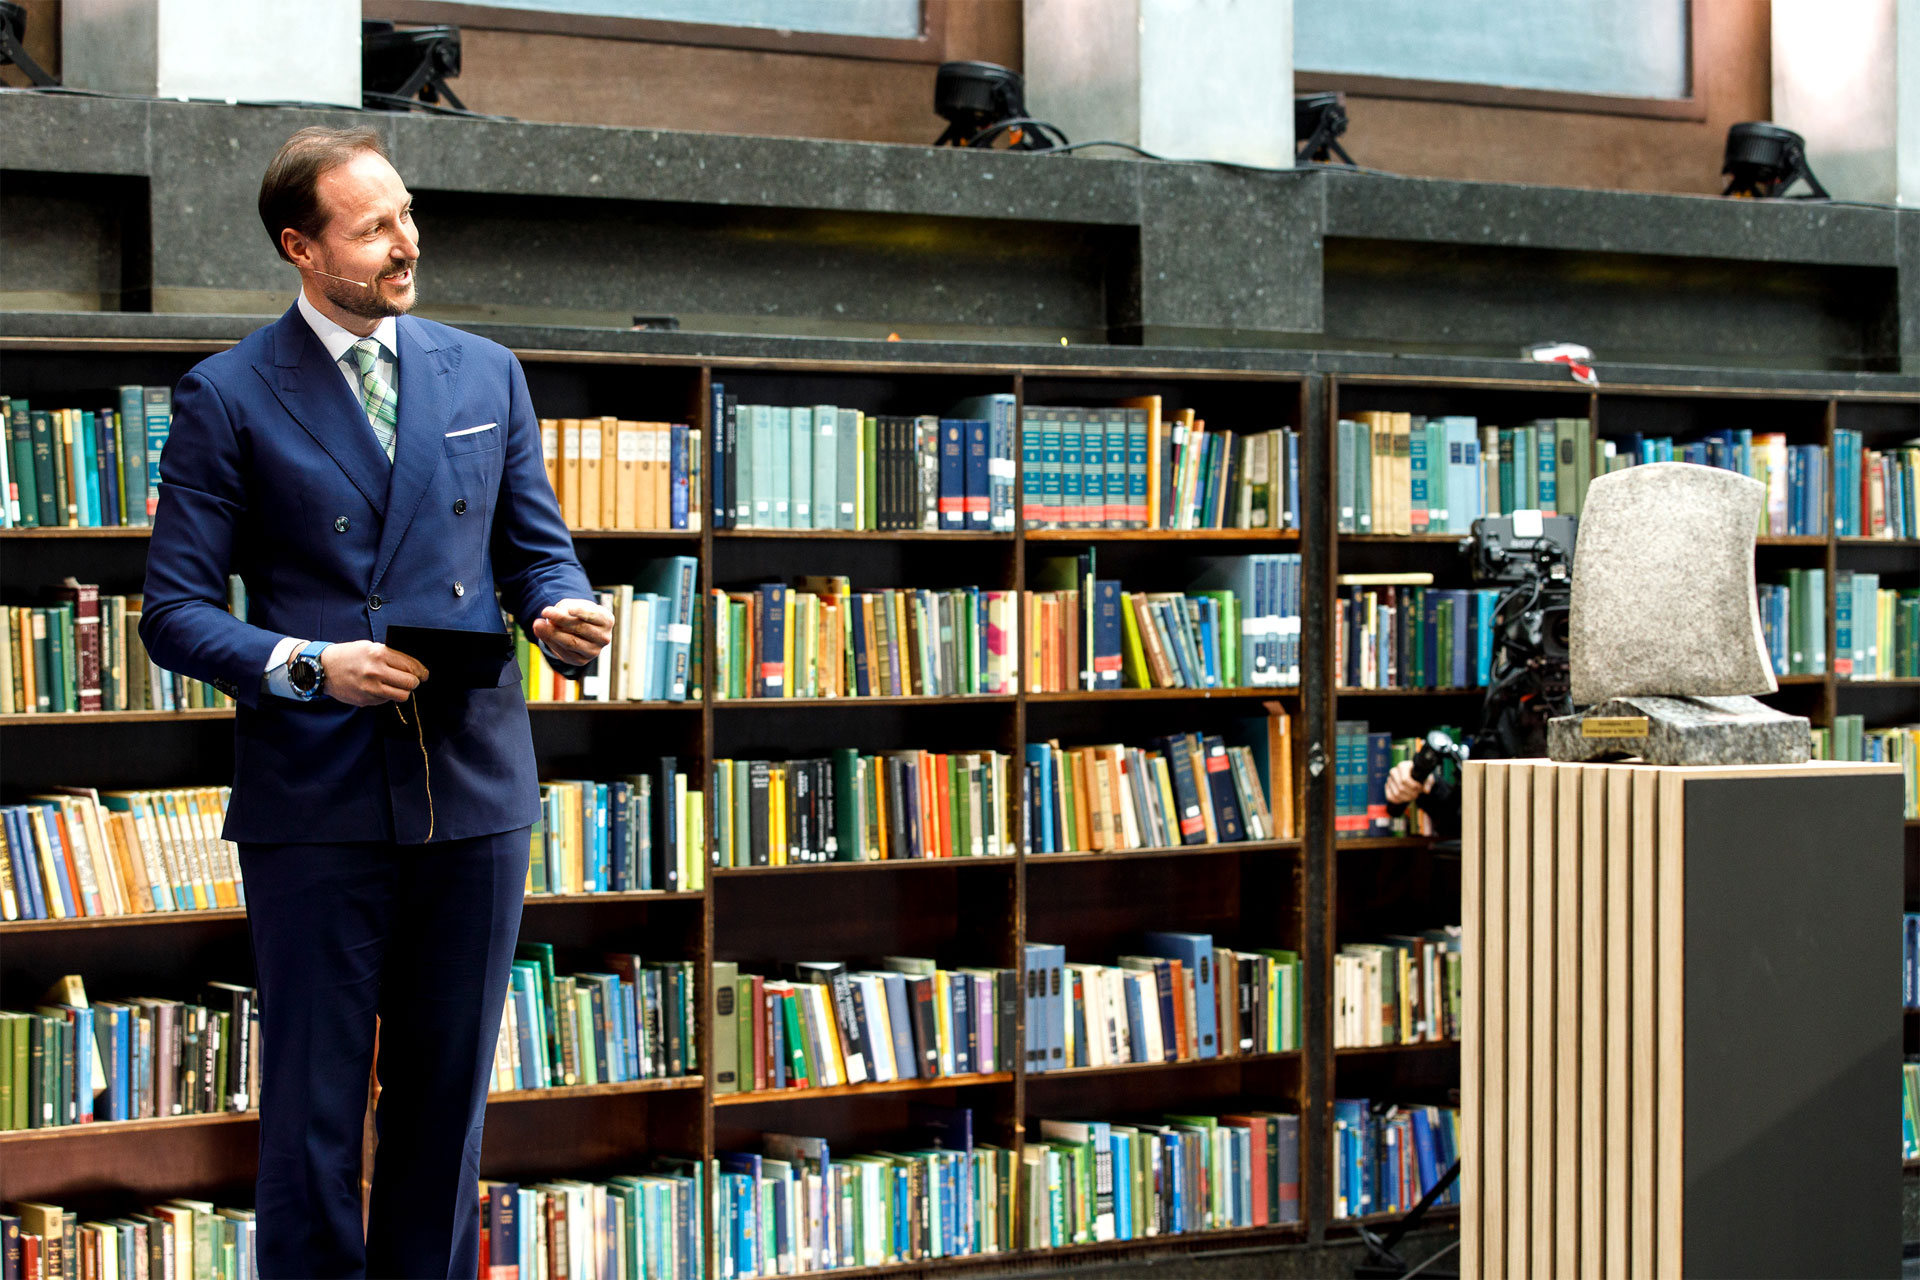 A person in a blue suit standing in front of a bookshelf filled with colourful books, with an abstract sculpture on a pedestal to the right